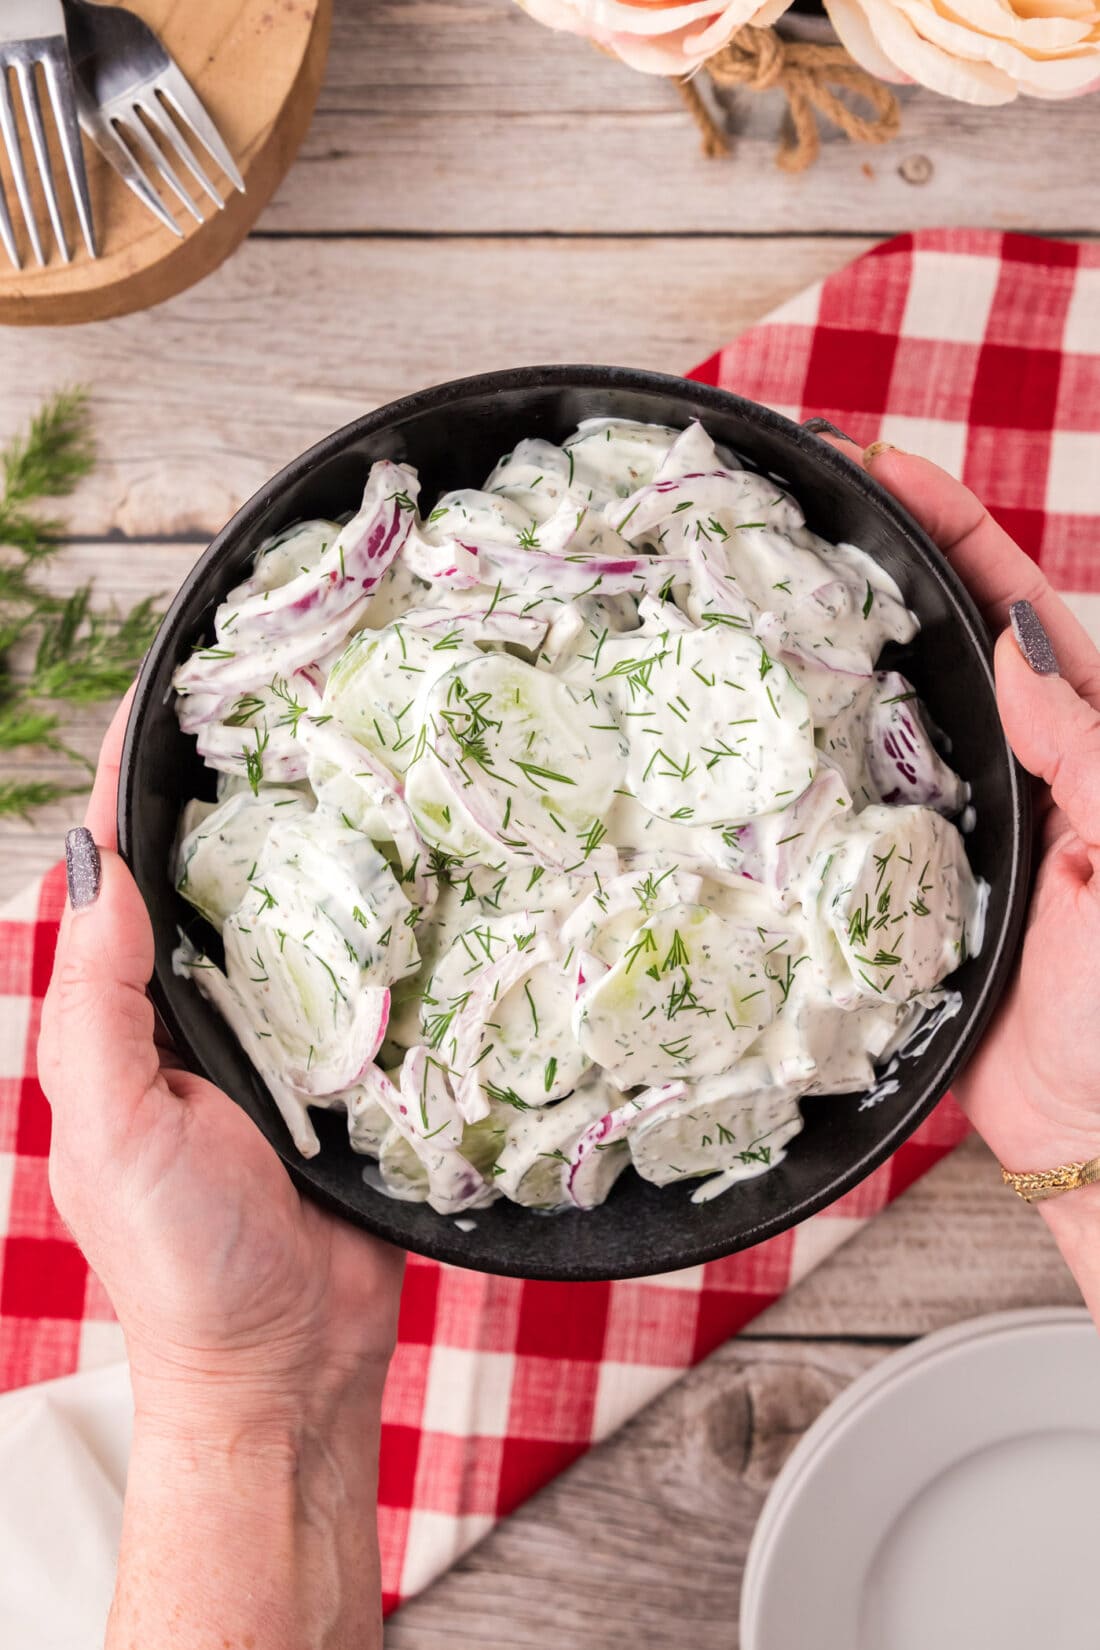 Hands holding a bowl of Creamy Cucumber Salad